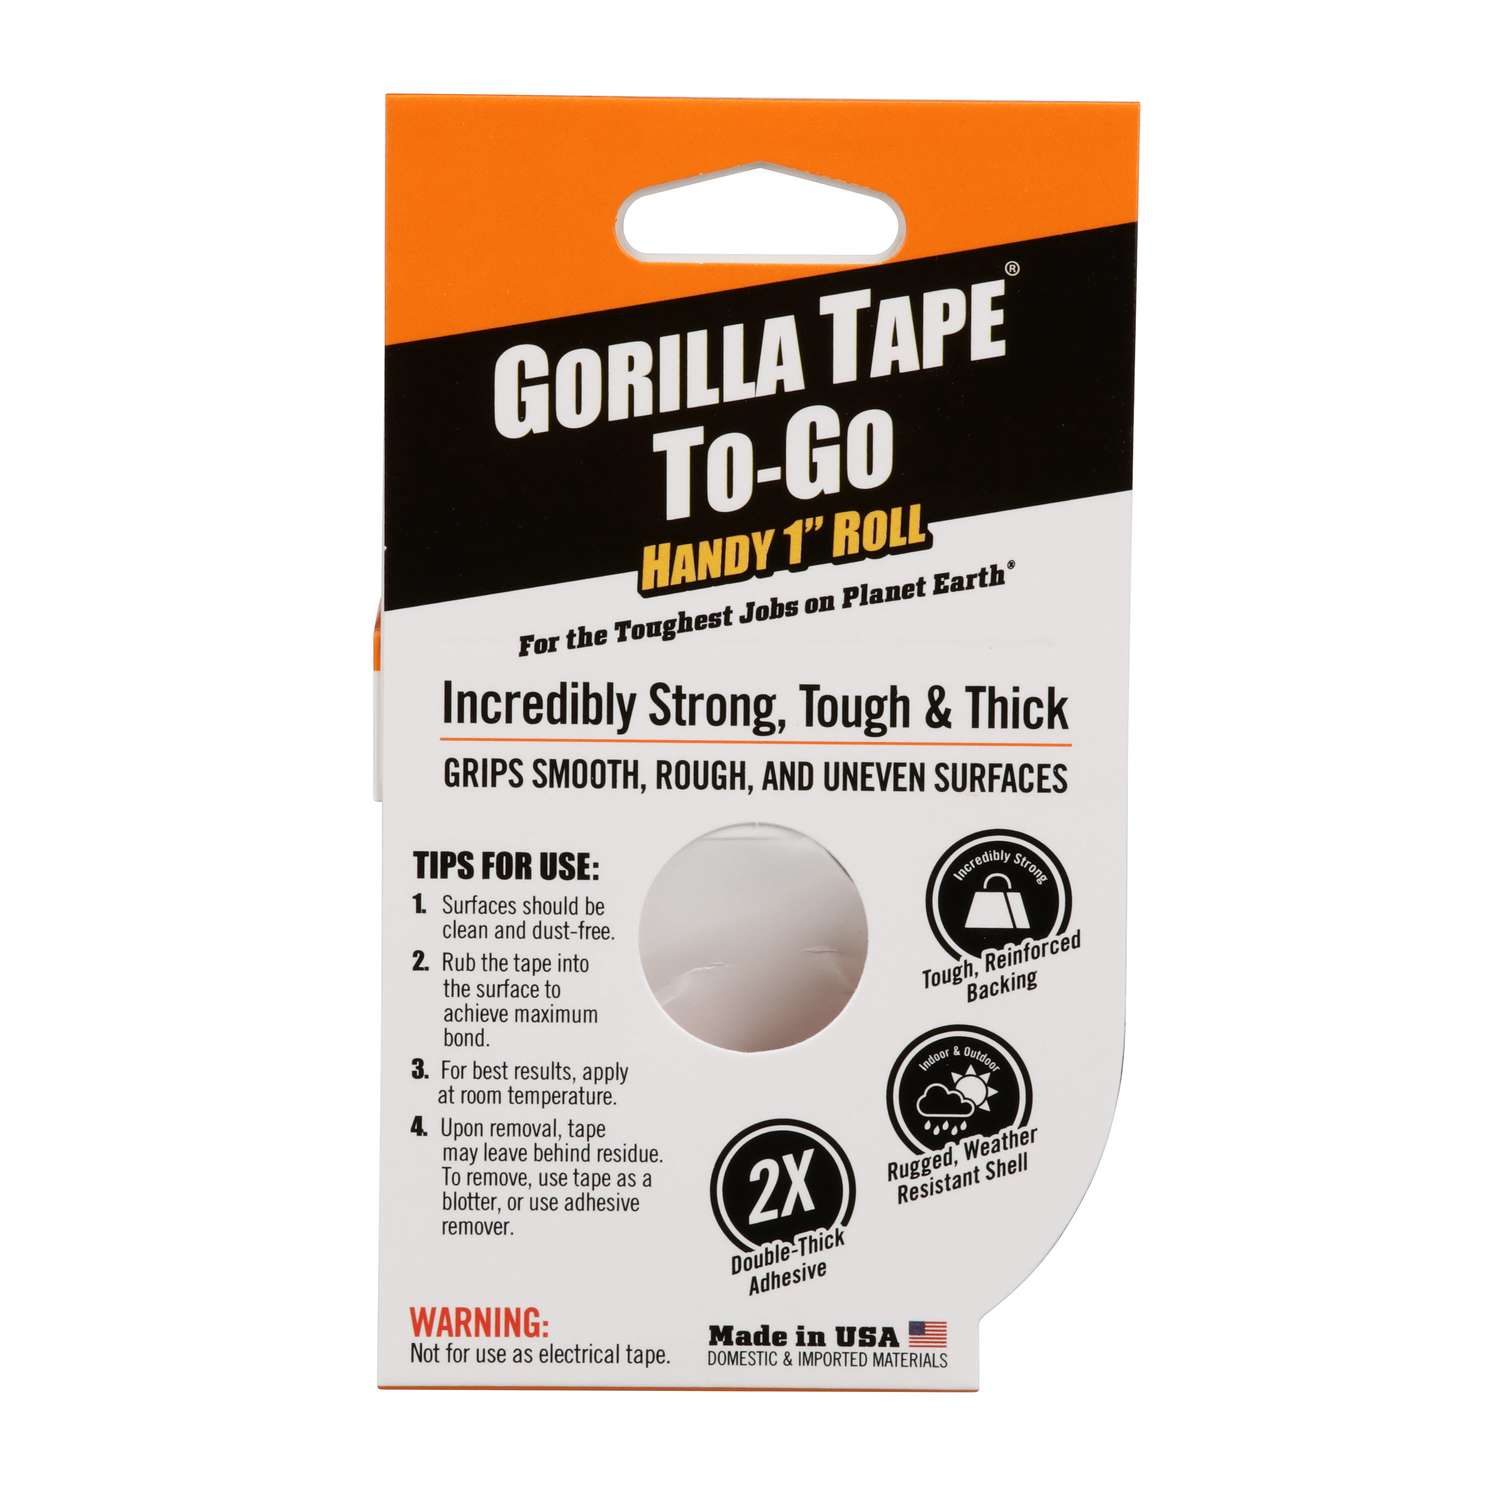 Gorilla Heavy Duty Mounting Tape 1-in x 5-ft Double-Sided Tape at